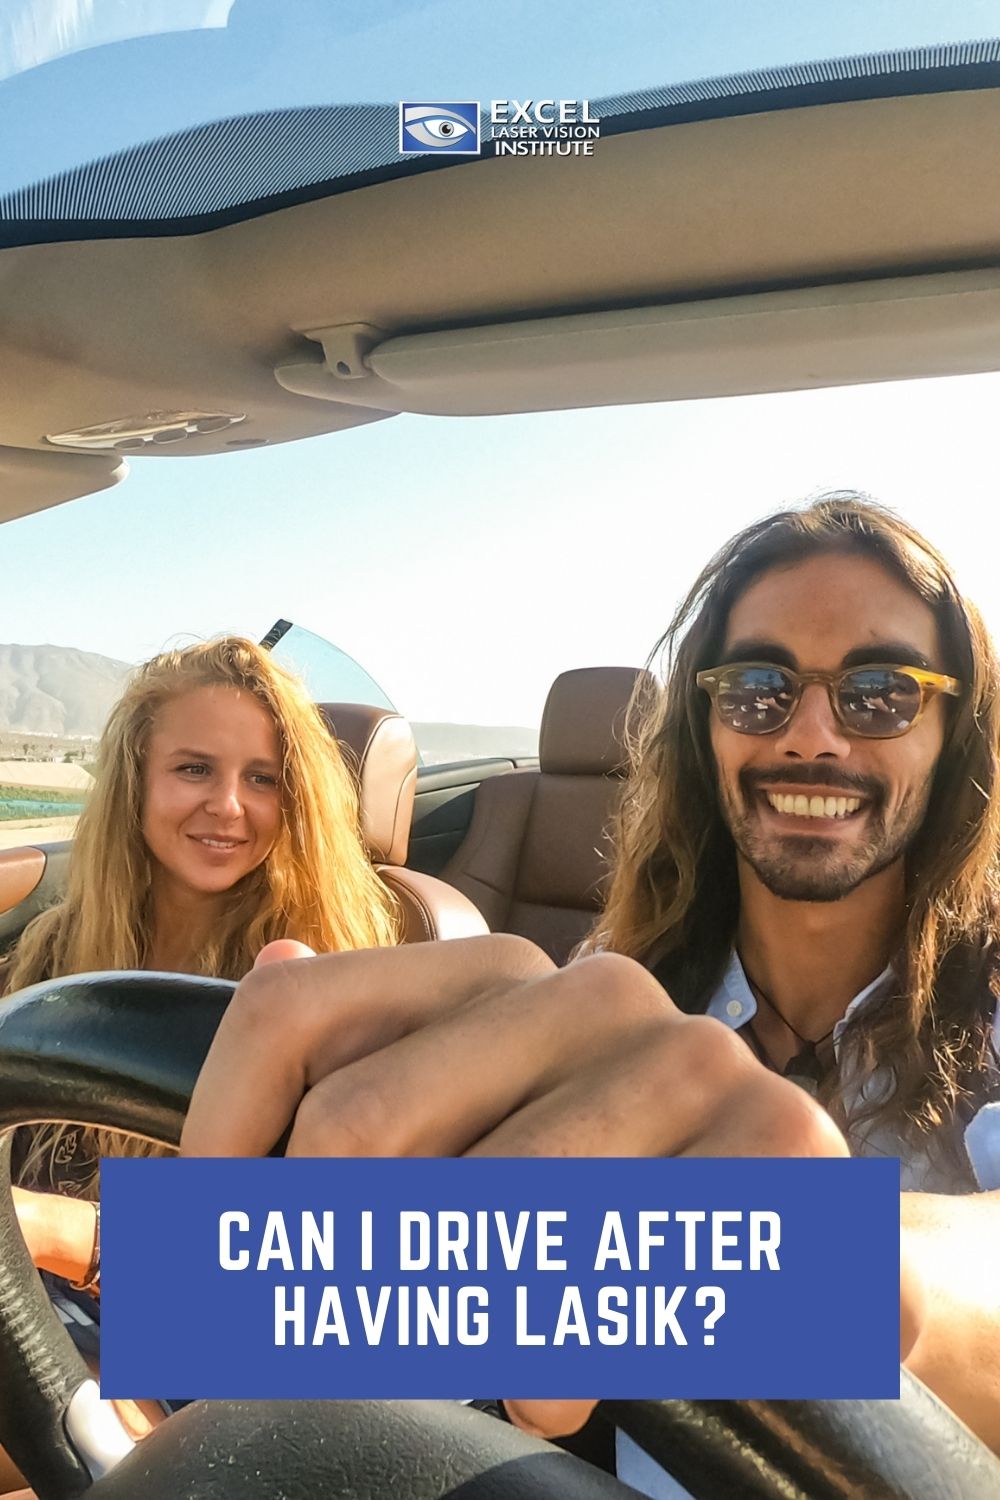 Find out when you can drive after having the Lasik Los Angeles procedure.